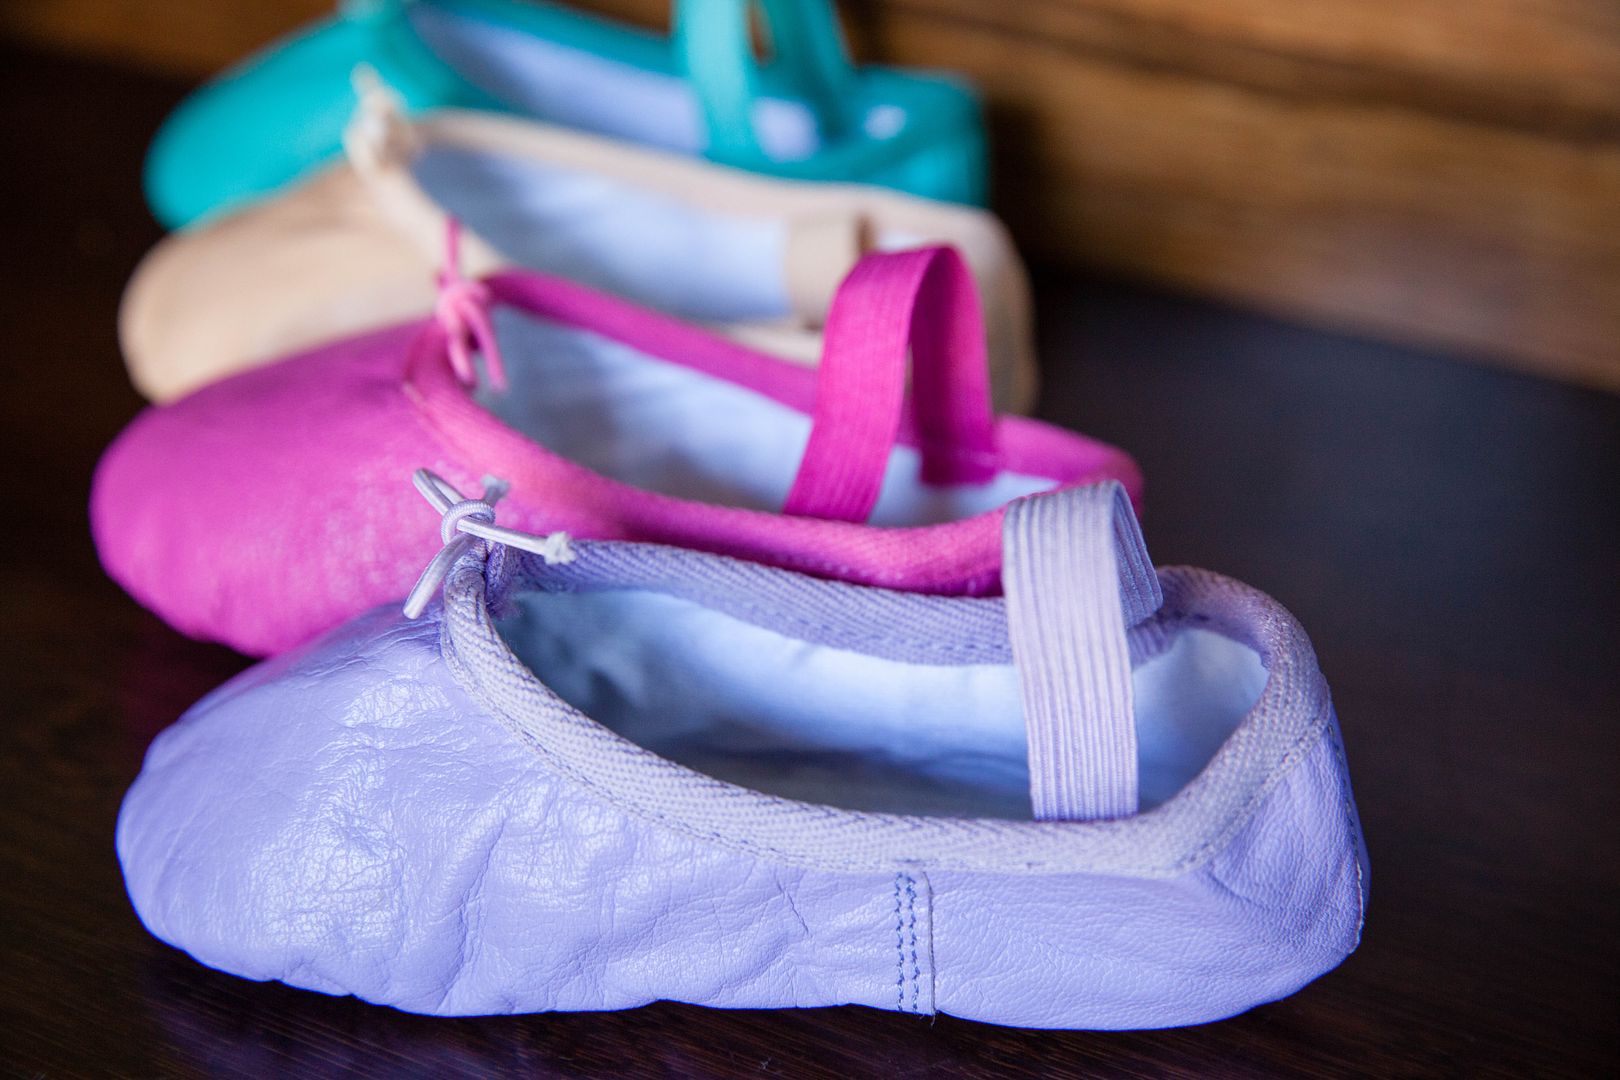 Linge Leather Ballet Shoes for Babies and Kids come in many colors